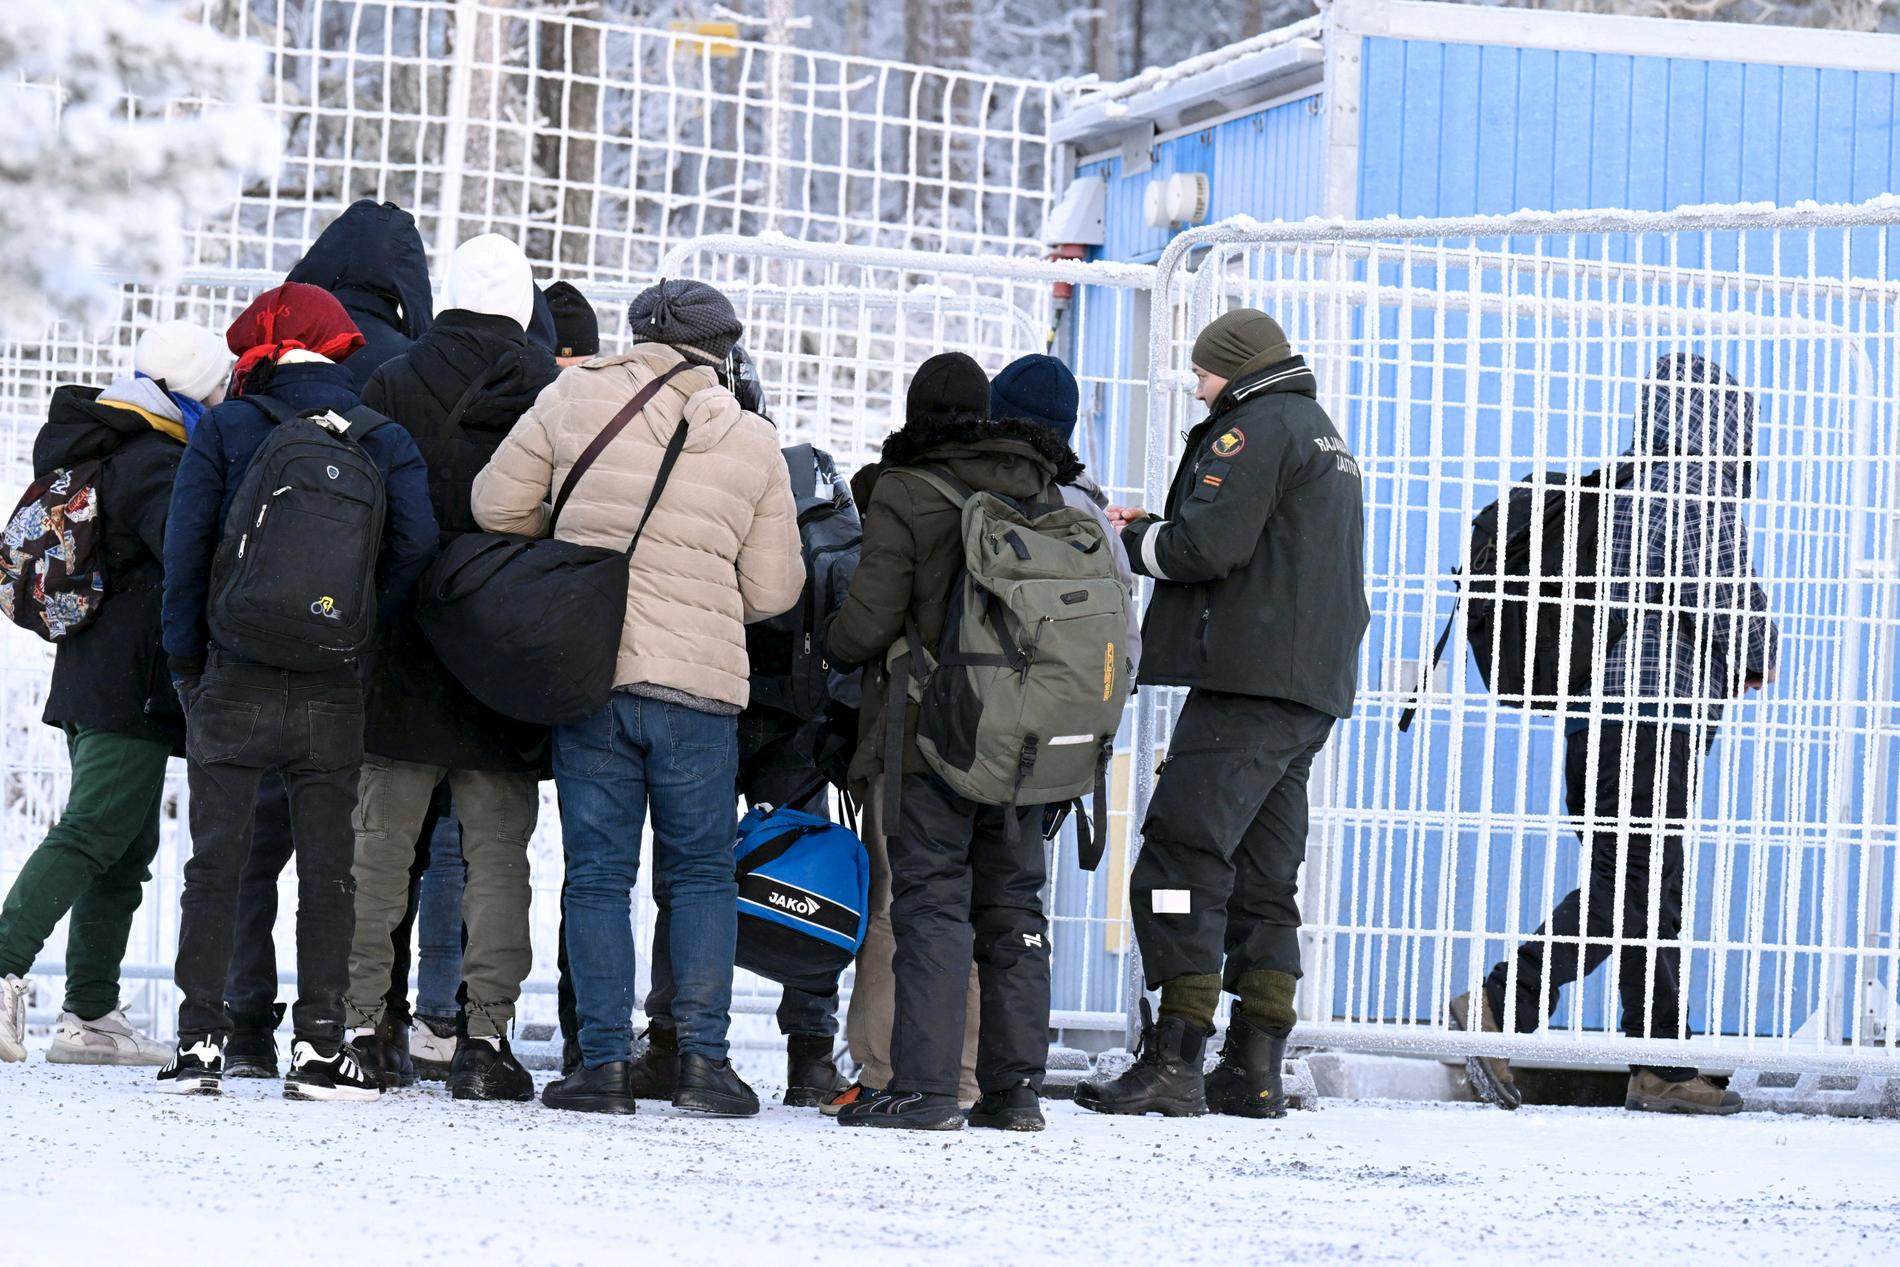 At the border: Migrants at the Finnish border on Tuesday.